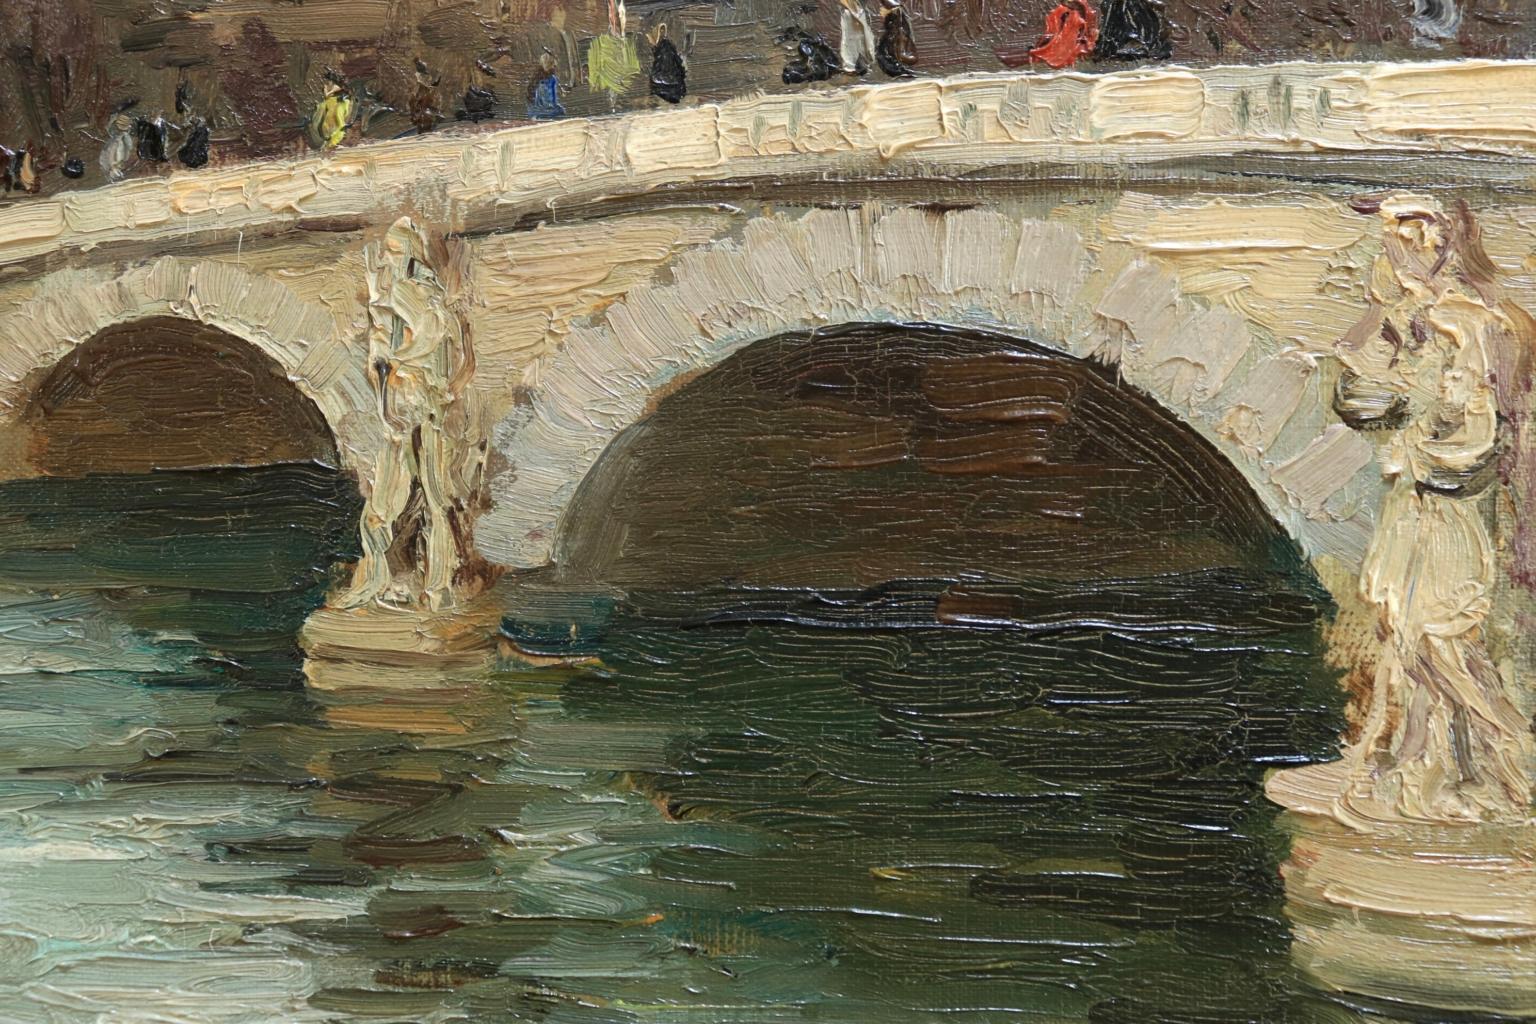 A lovely oil on canvas circa 1940 by sought after French painter Marcel Dyf, depicting a view of the Pont de l'Alma (Alma Bridge) which runs over the River Seine and the buildings of Paris beyond. Figures are crossing the bridge on what appears to